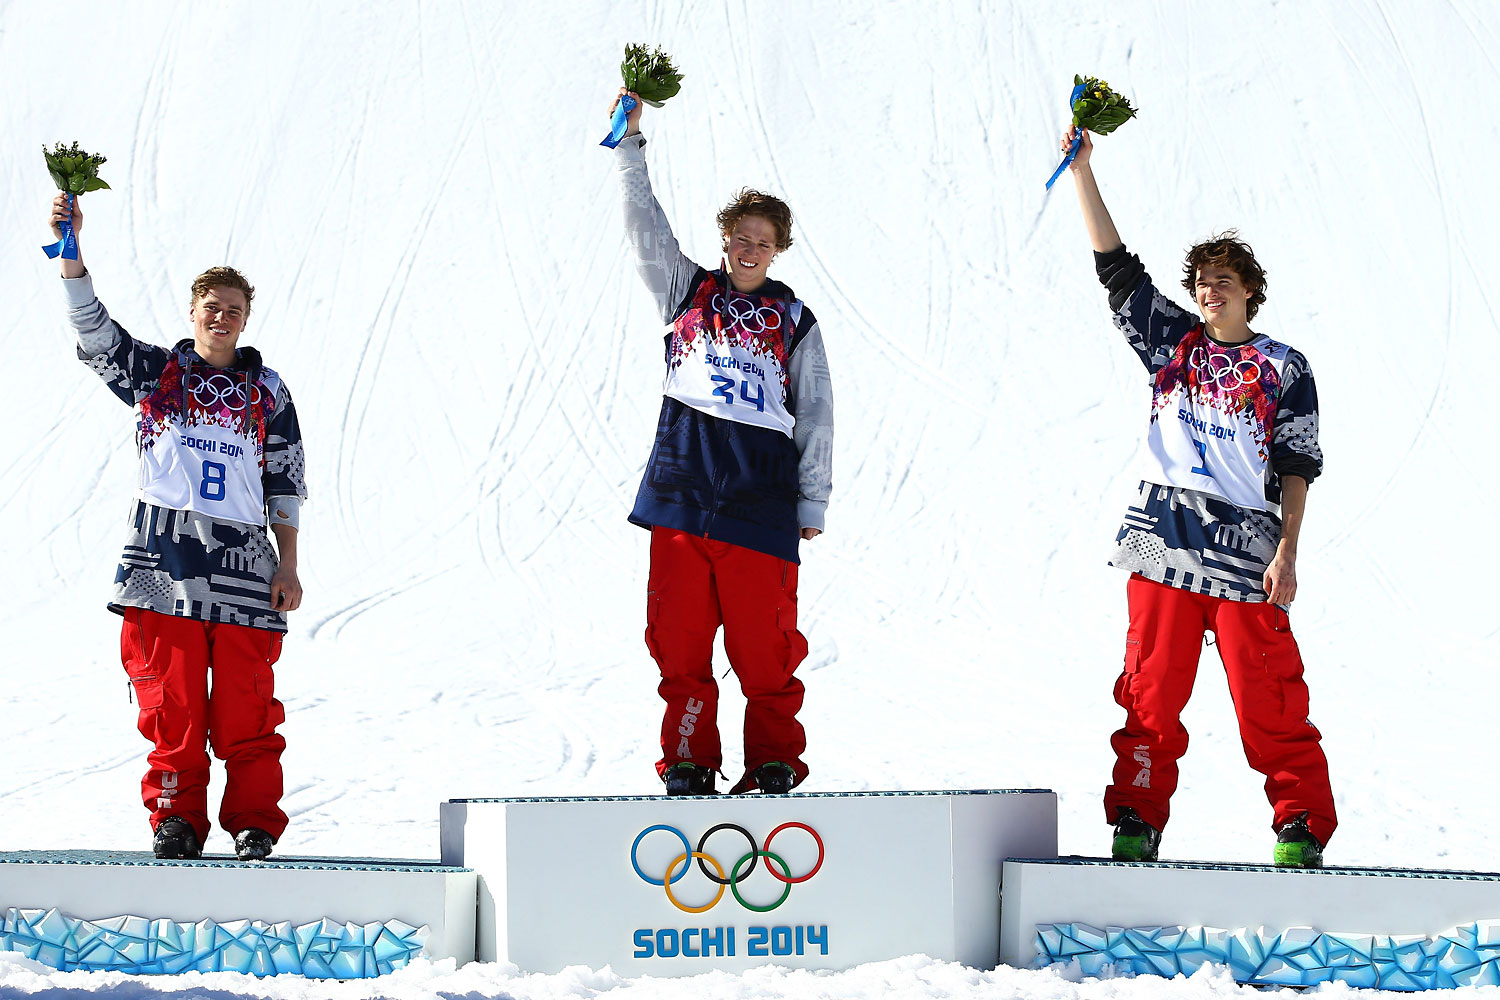 Silver medalist Gus Kenworthy of the United States, gold medalist Joss Christensen of the United States and bronze medalist Nicholas Goepper of the United States stand on the podium during the flower ceremony after the Freestyle Skiing Men's Ski Slopestyle Finals on Feb. 13, 2014 in Sochi.